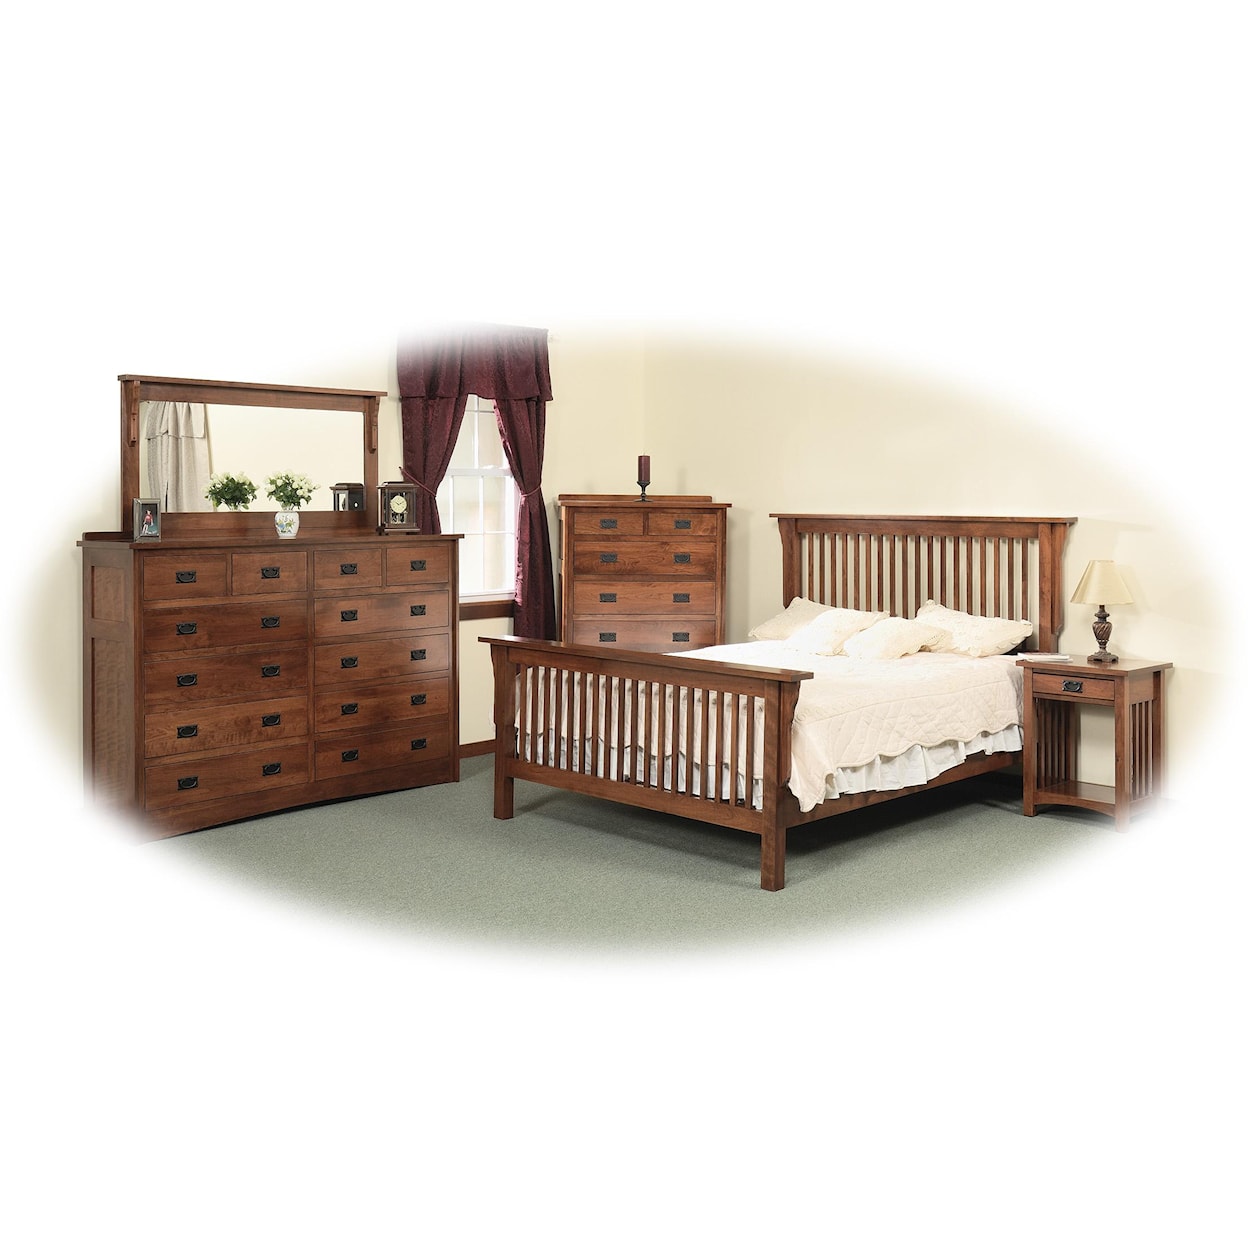 Daniel's Amish Mission Twin Frame Bed